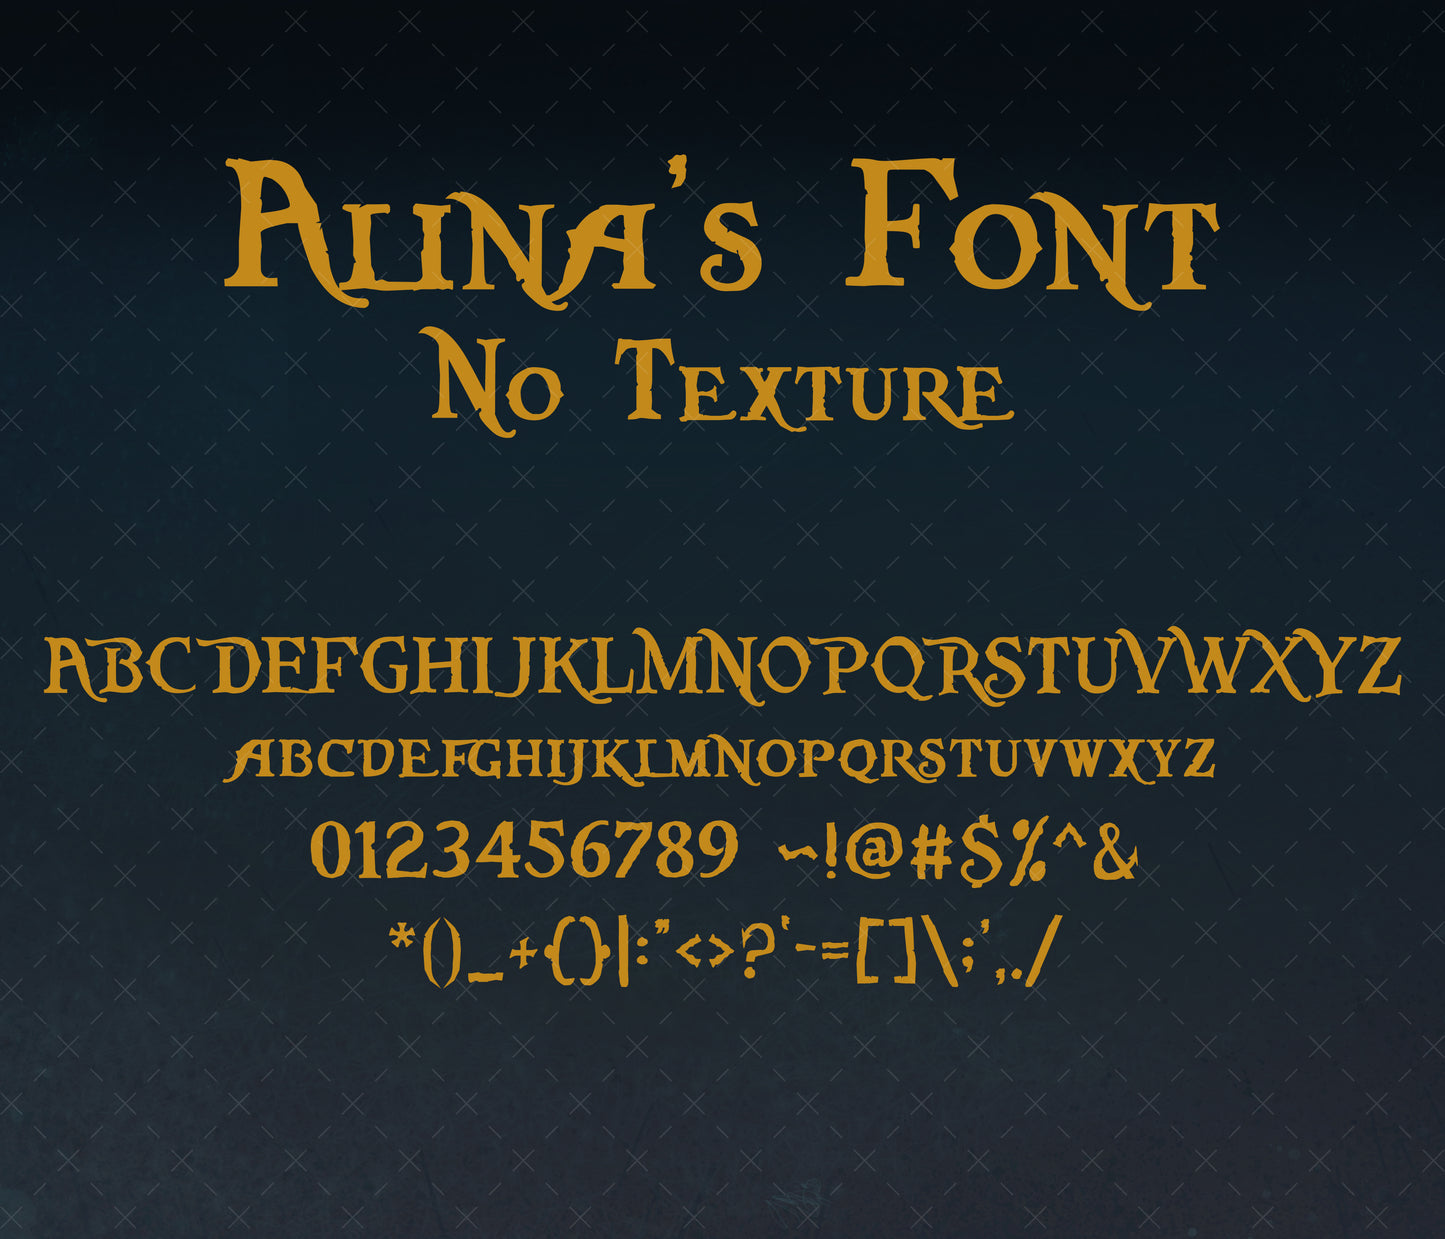 Pirates Of The Caribbean Textured Font